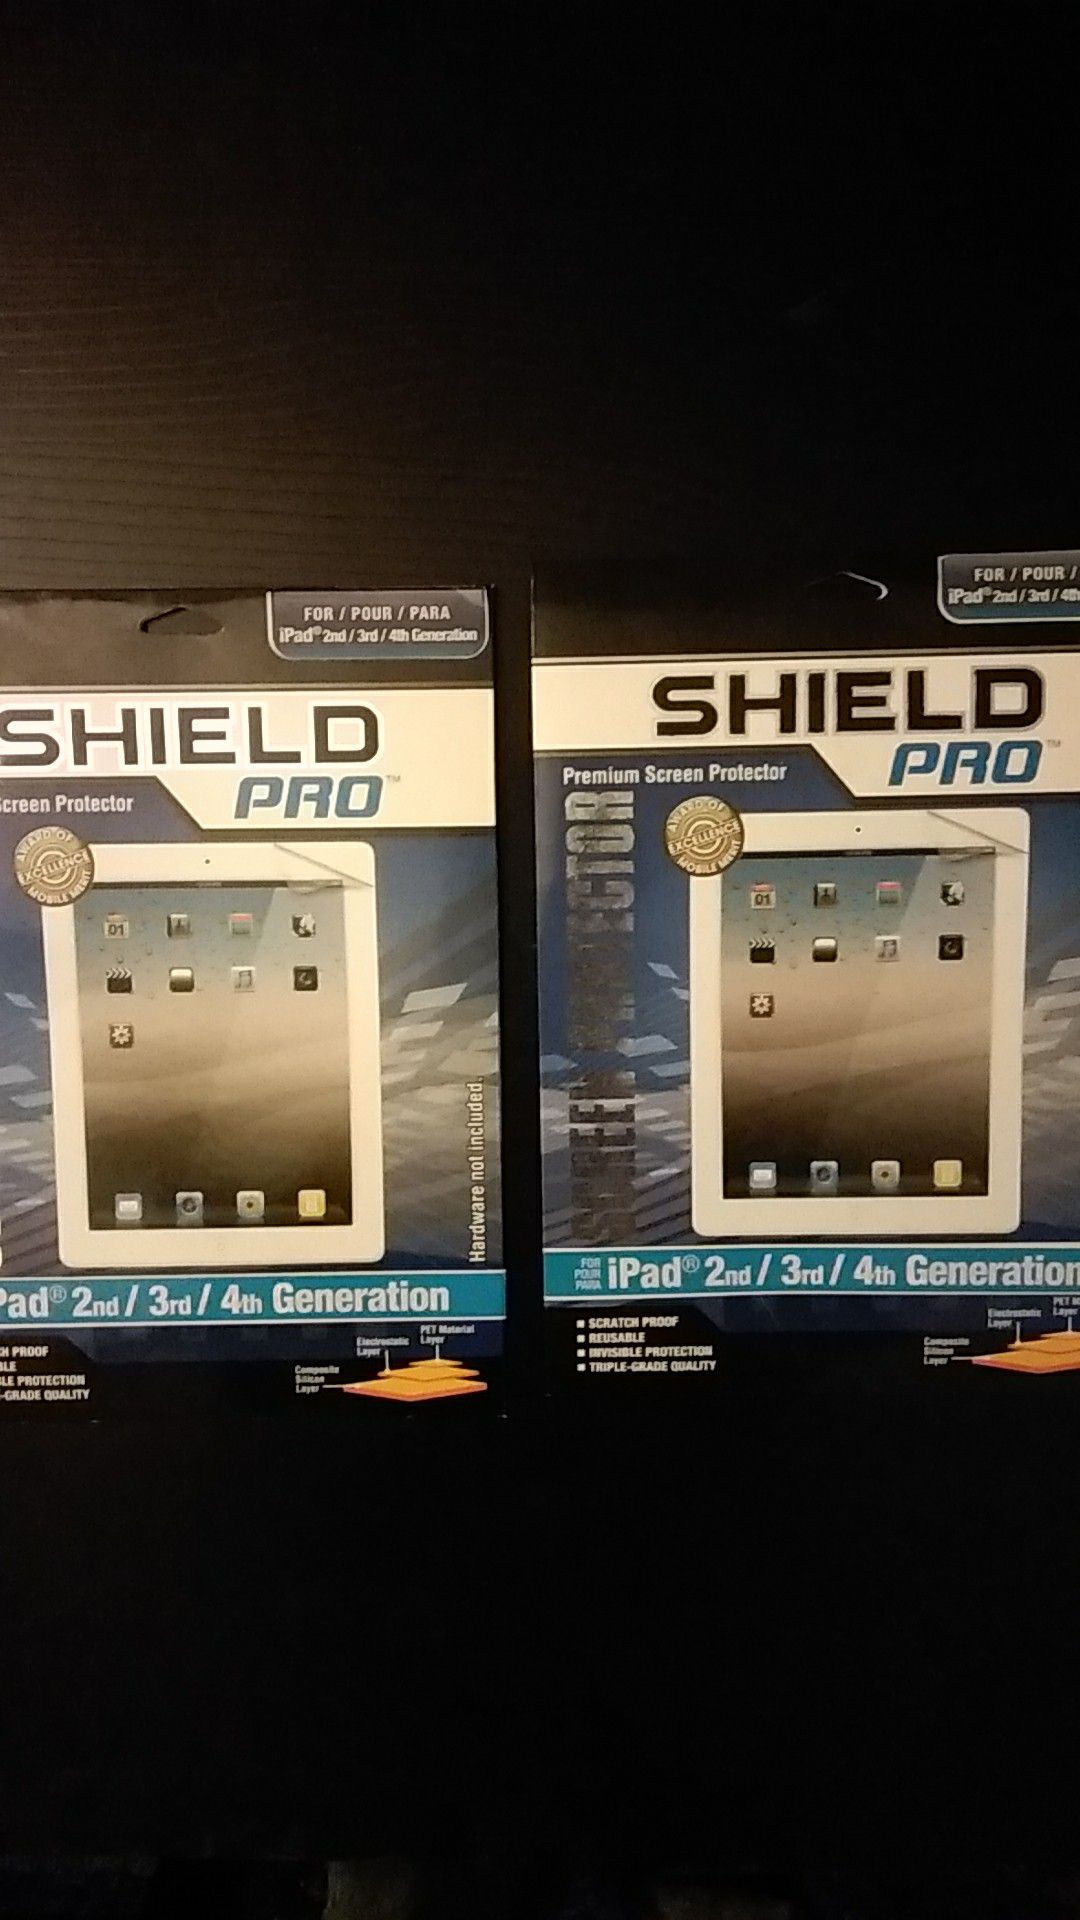 Shield Pro screen protector for iPad 2nd/ 3rd/ 4th generation